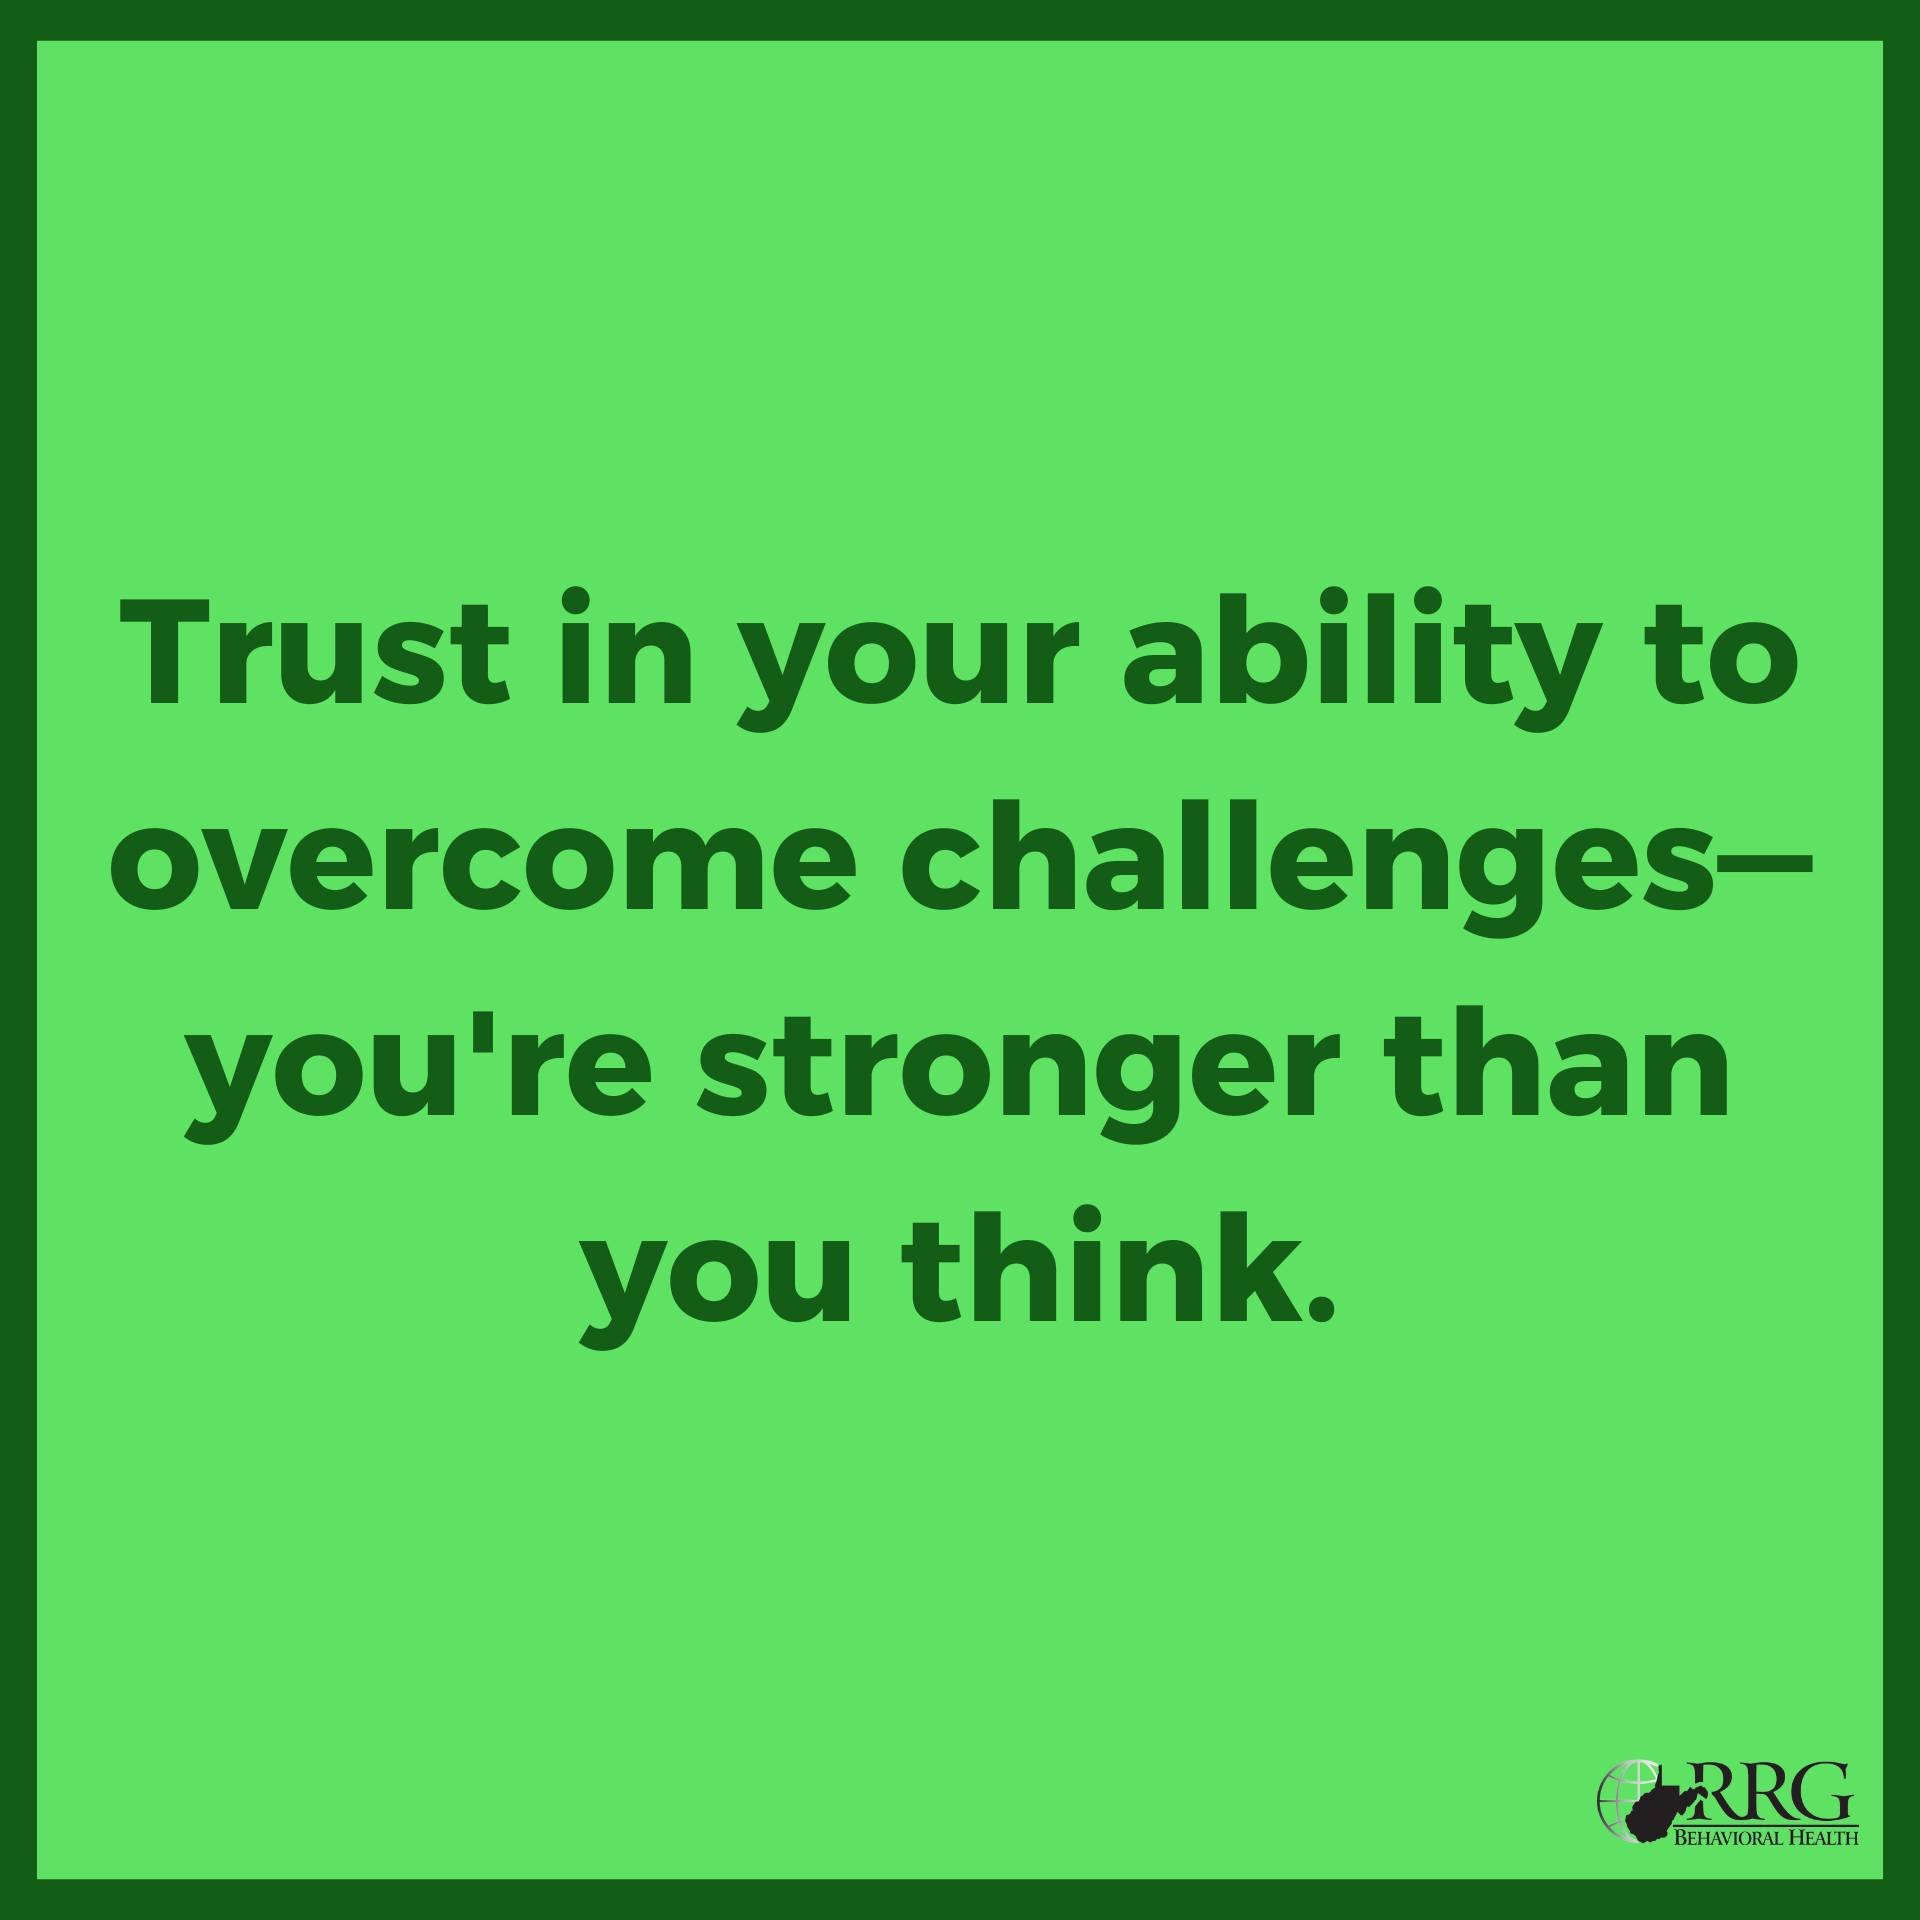 Trusting your own strength and having the confidence to keep your head held high can change the way you think and approach recovery. 

Our therapy services can help you. Visit us at rrgwv.com or call us at 681-378-3908 to learn more.

​#sobriety #sob